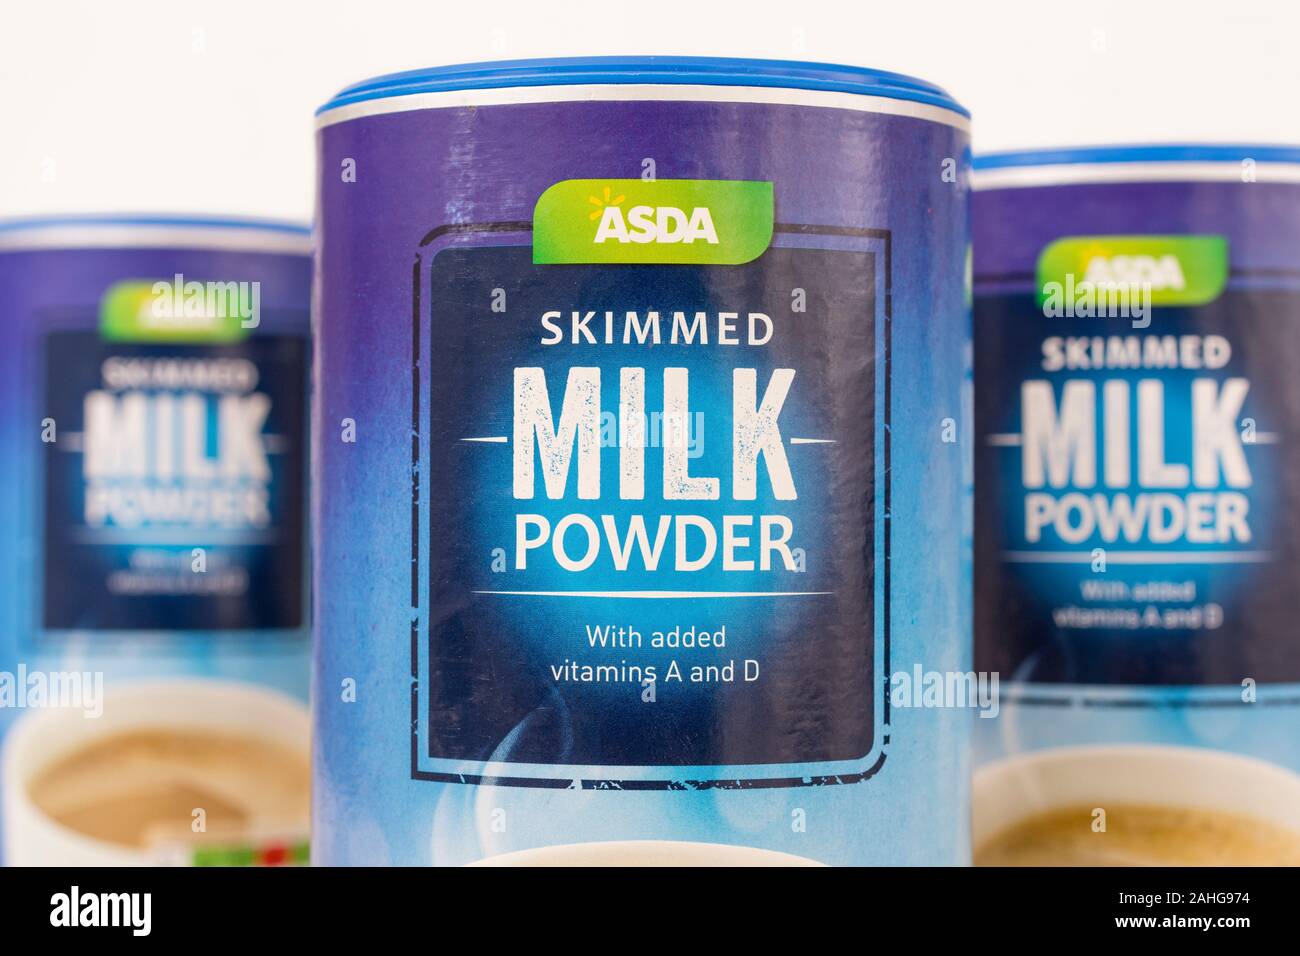 ASDA own-label semi skimmed milk cartons against white background. For food labelling, label design, brand awareness, own label food brands. Stock Photo